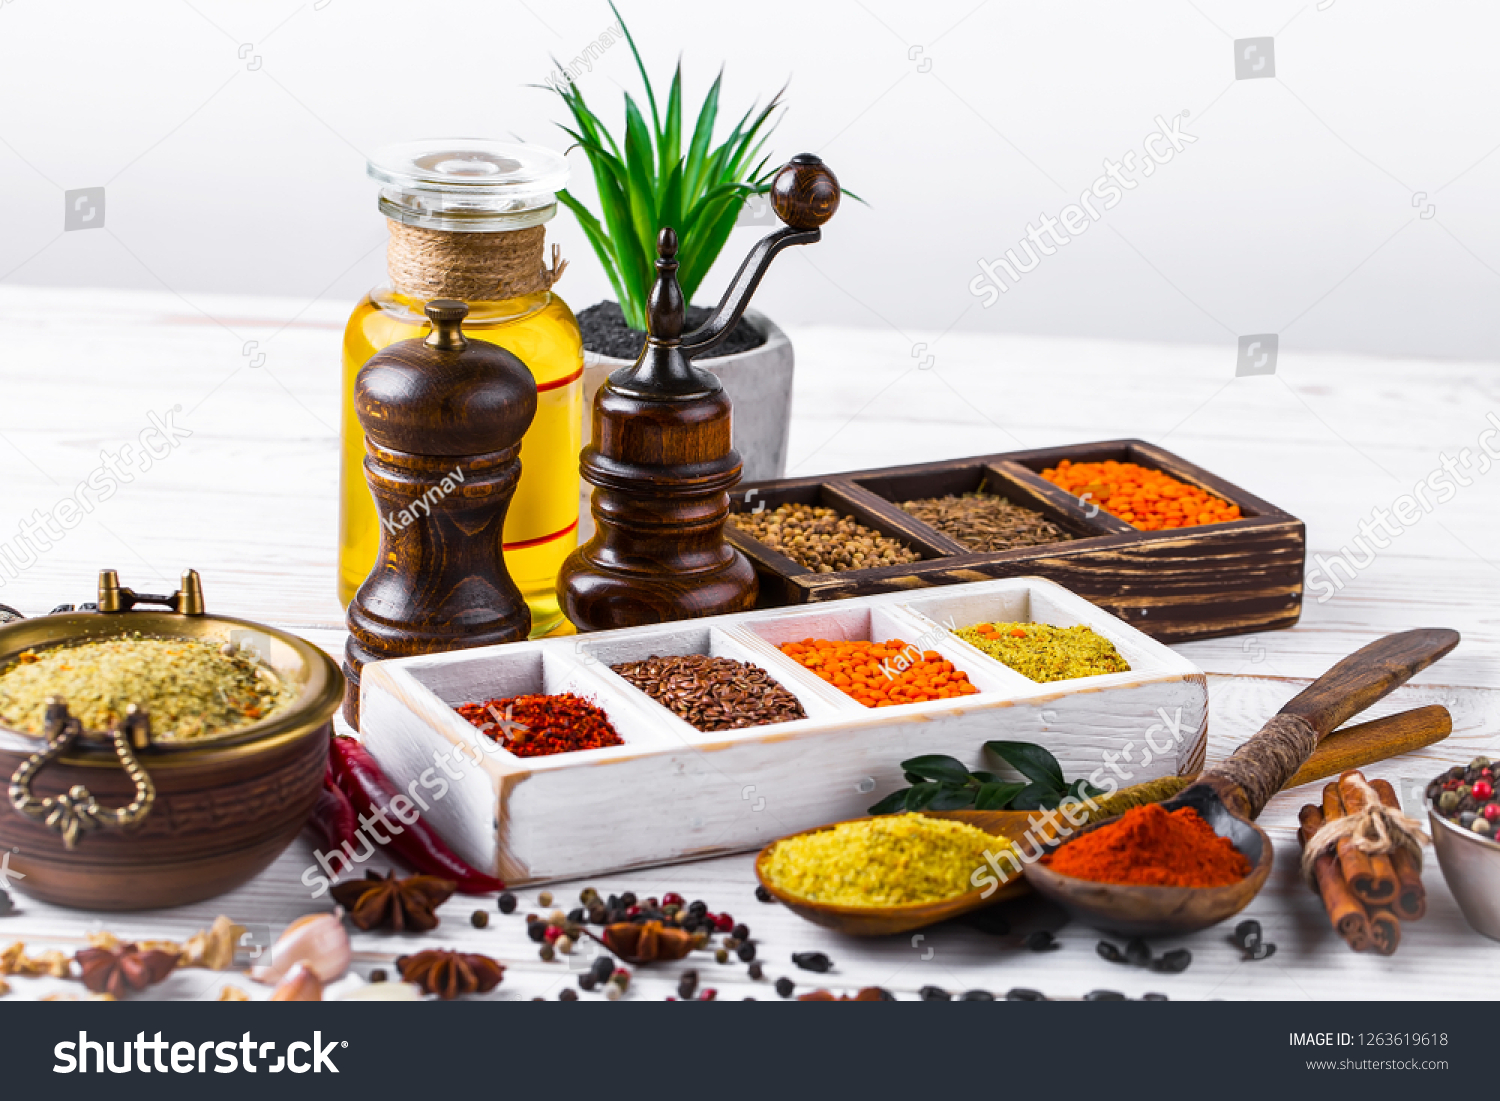 Spices and seasonings on the kitchen table on the old background #1263619618